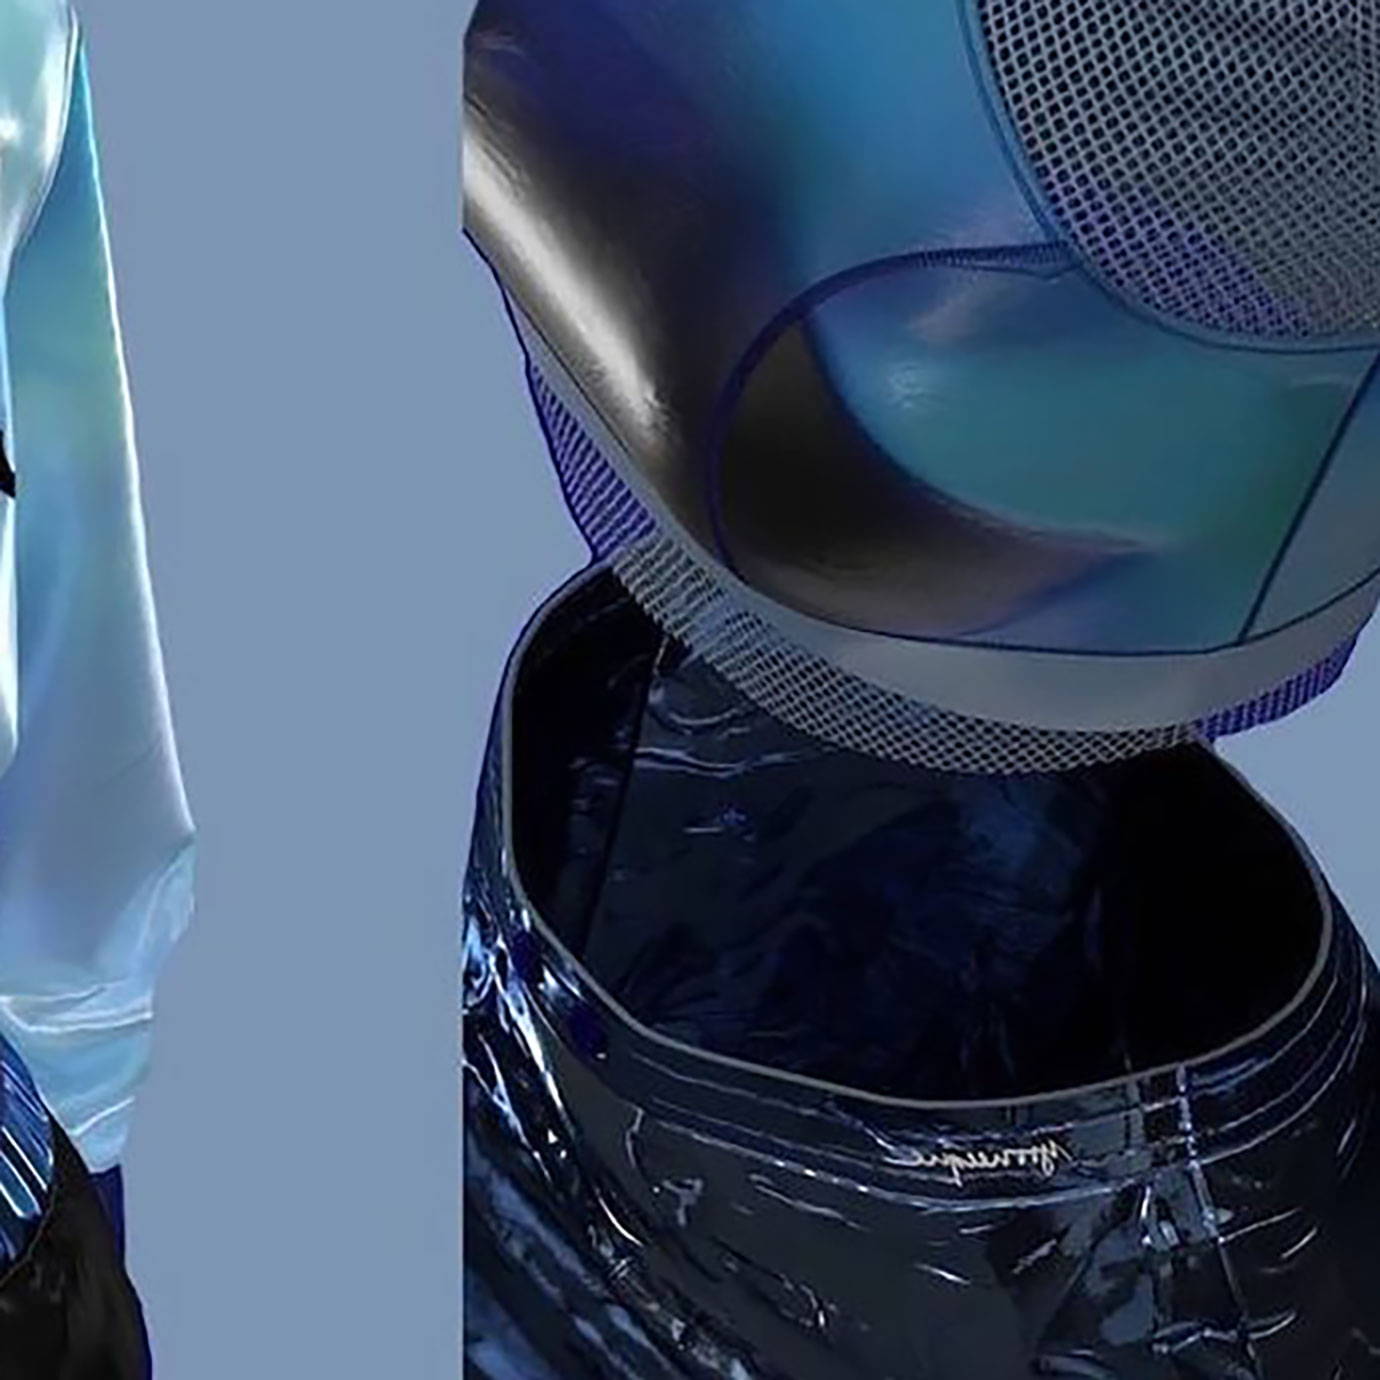 Yoona AI is a fashion tech startup that created a digital design automated tool, they create digital fashion and virtual reality in the metaverse 